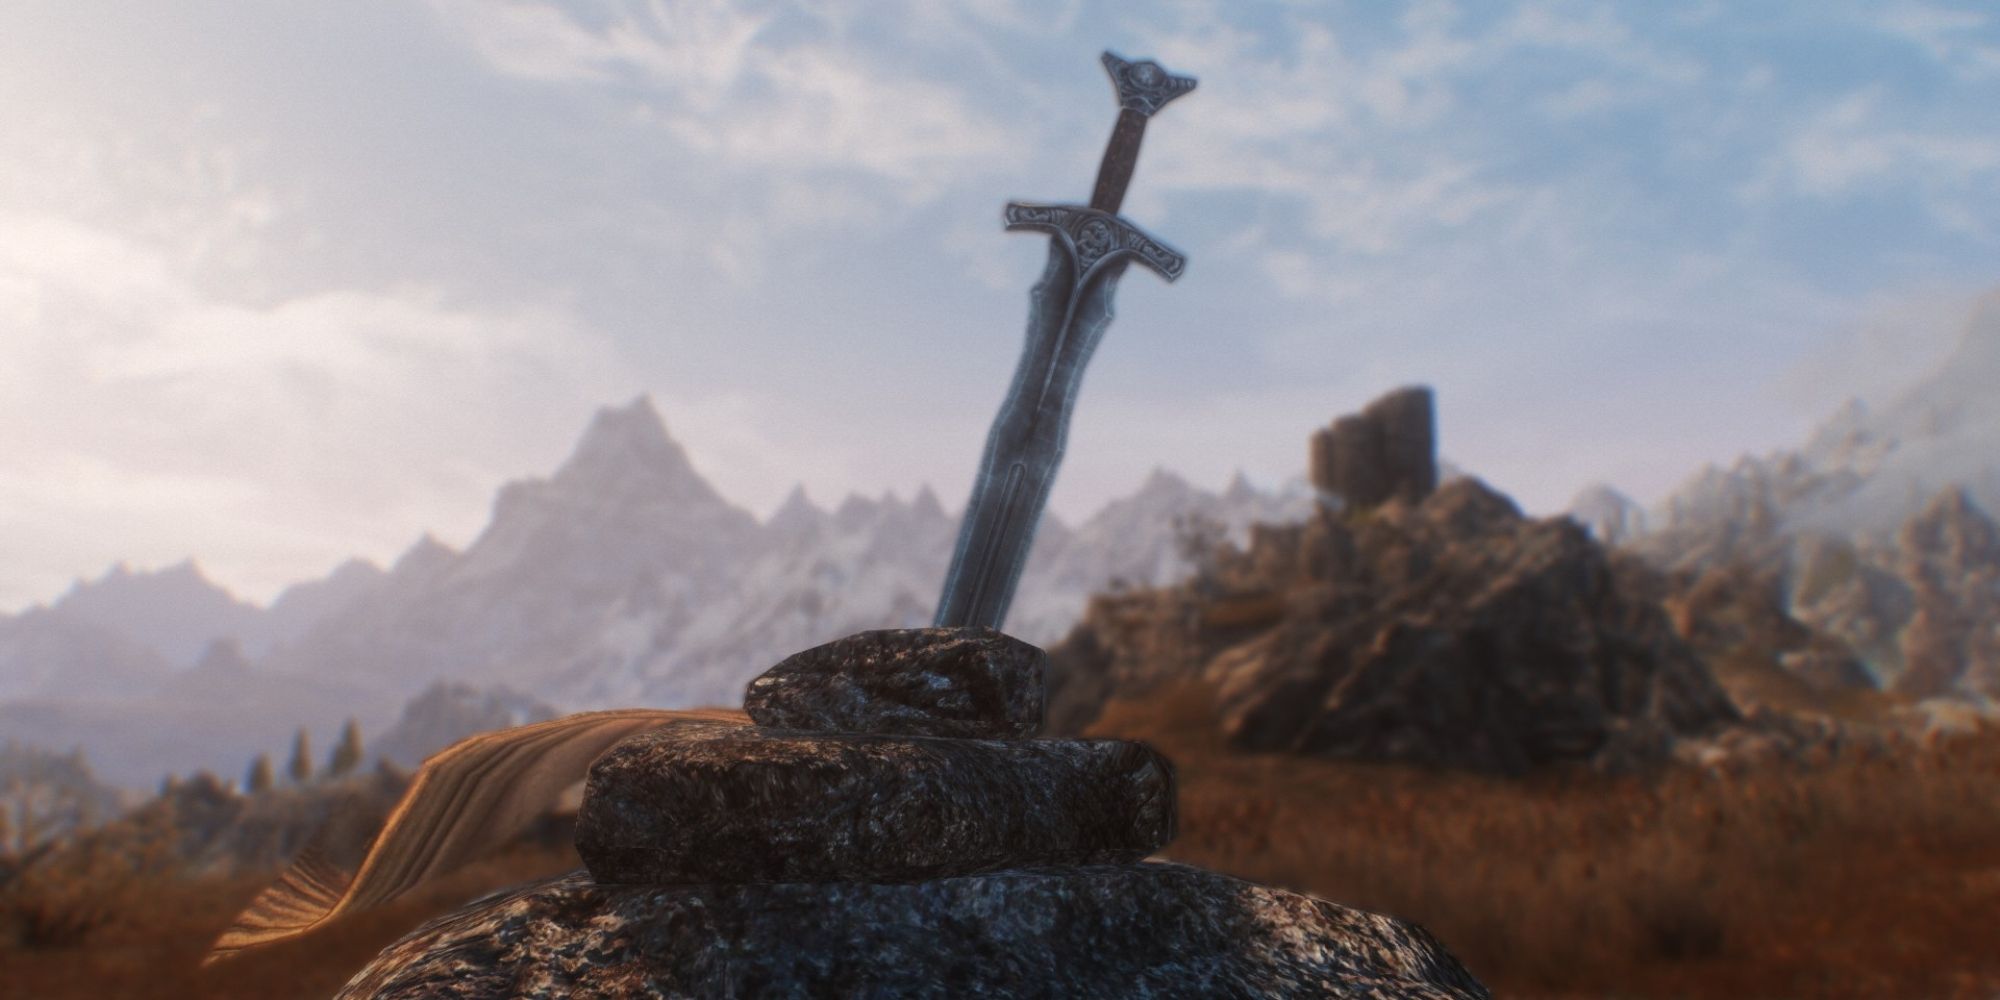 Skyrim: Where To Find The Sword In The Stone